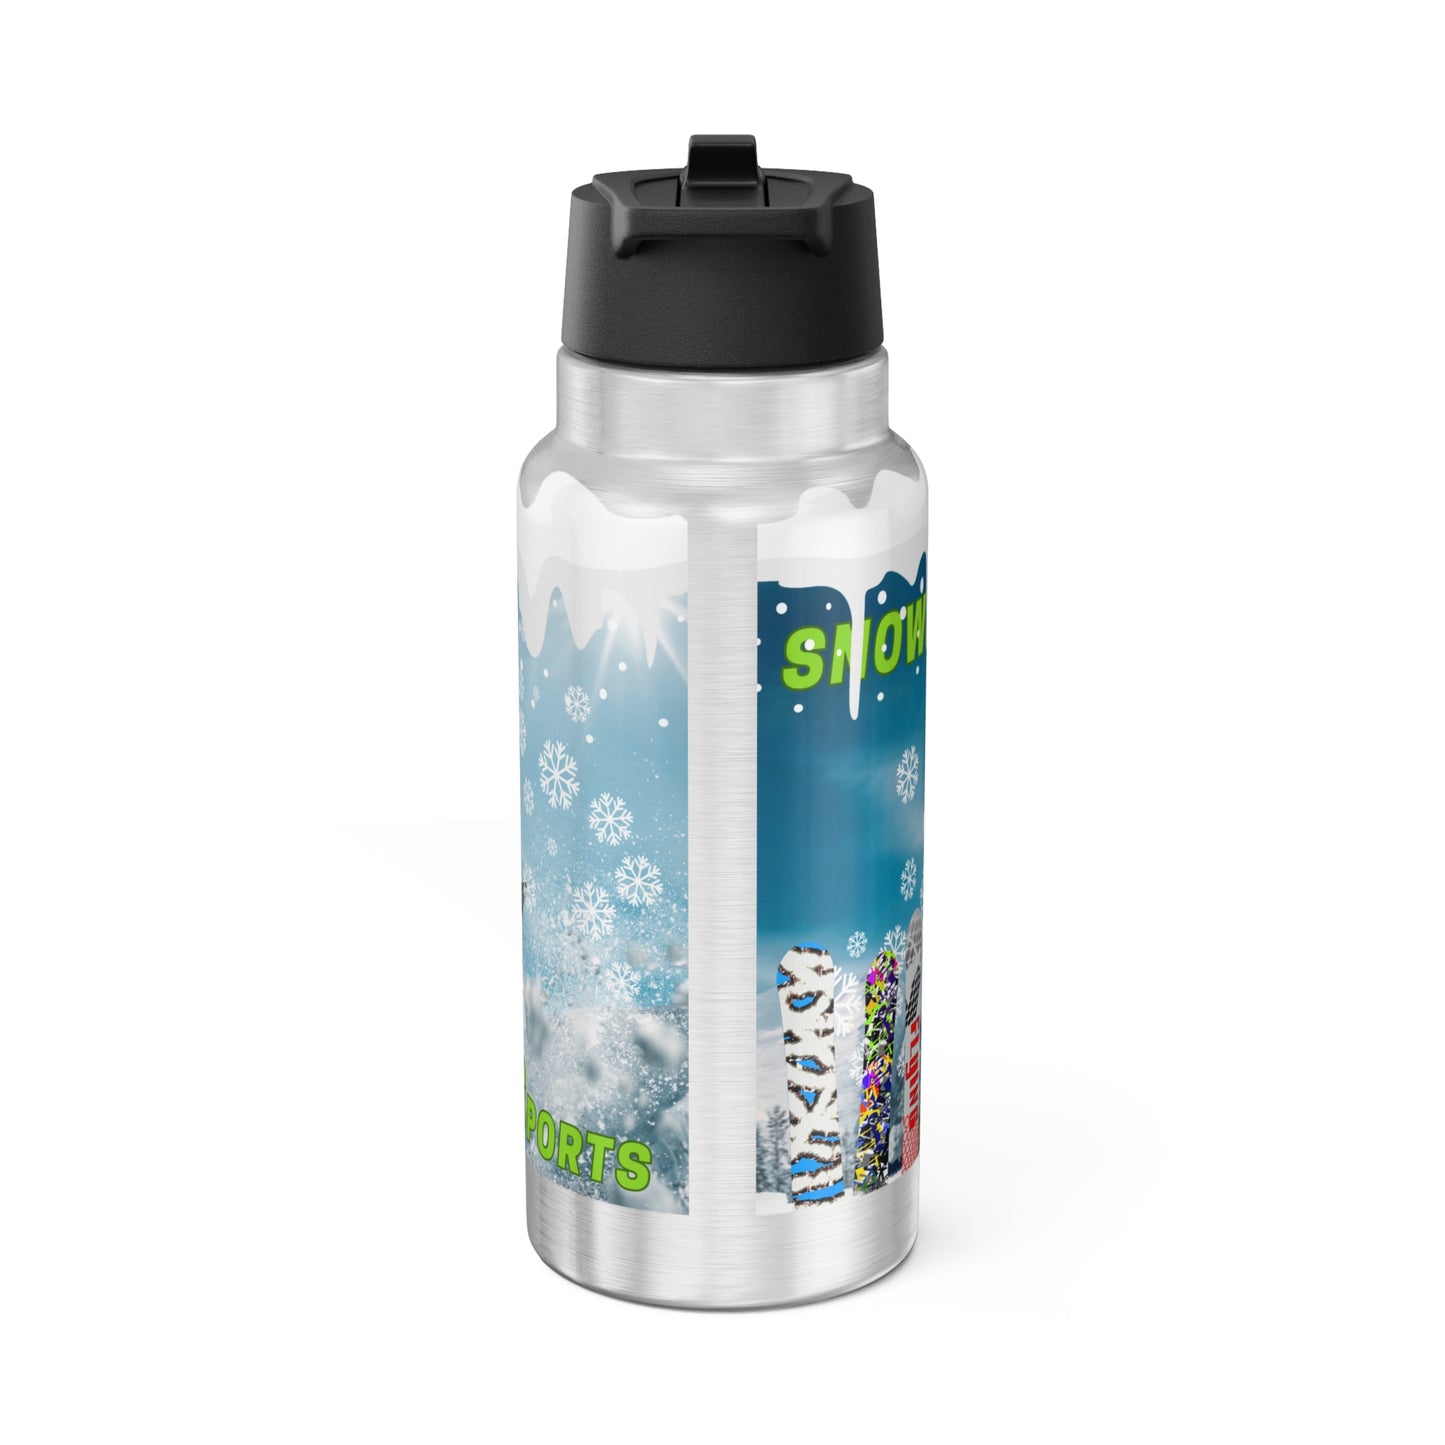 Water Bottle or Favourite Beverage, Snowboarding Xtreme Sports 32oz